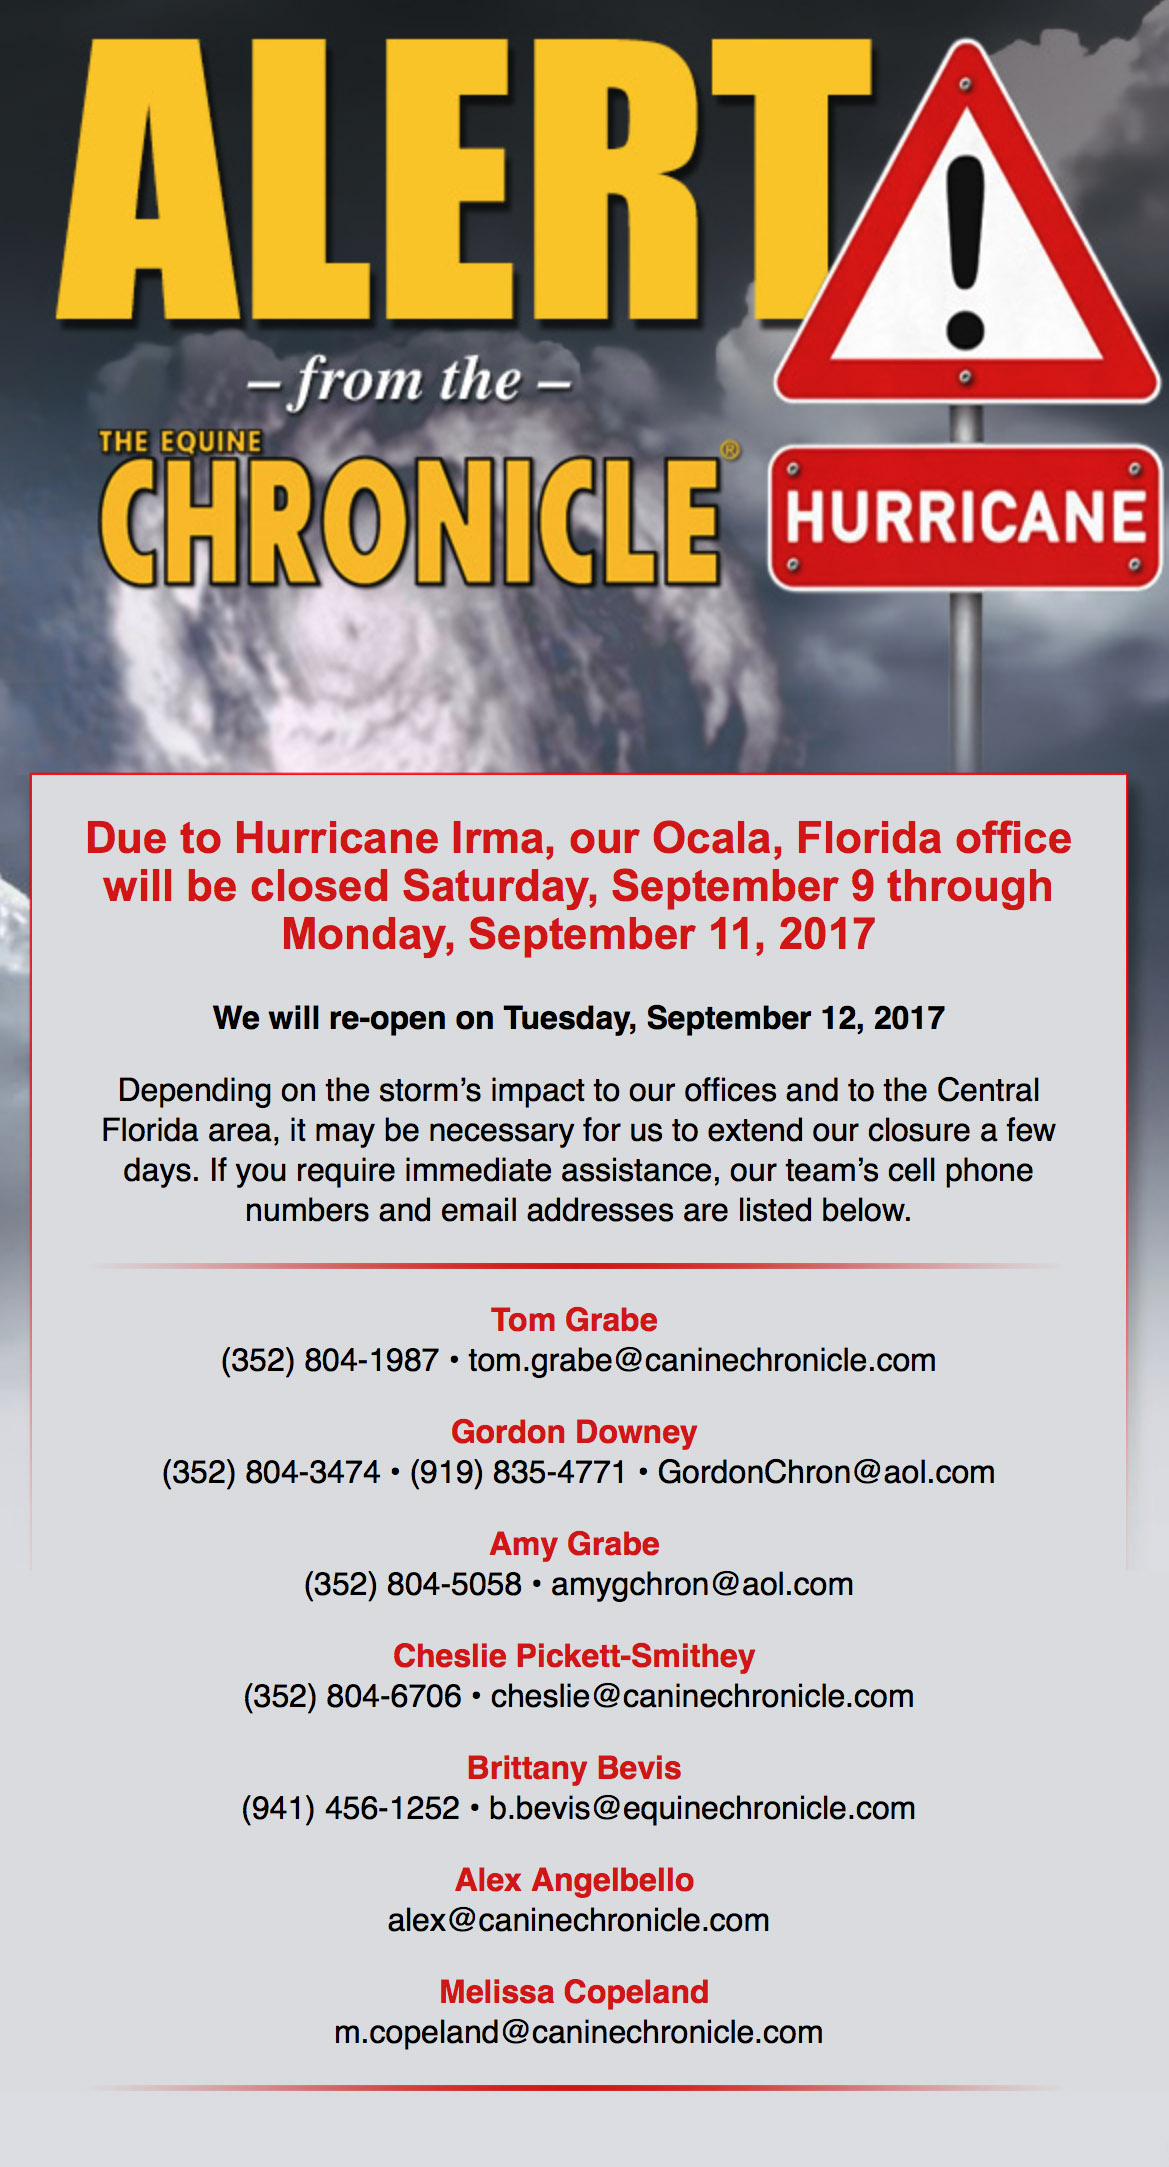 Due to Hurricane Irma, our Ocala, Florida office will be closed Saturday, September 9 and Monday, September 11, 2017.  We will re-open on Tuesday, September 12, 2017